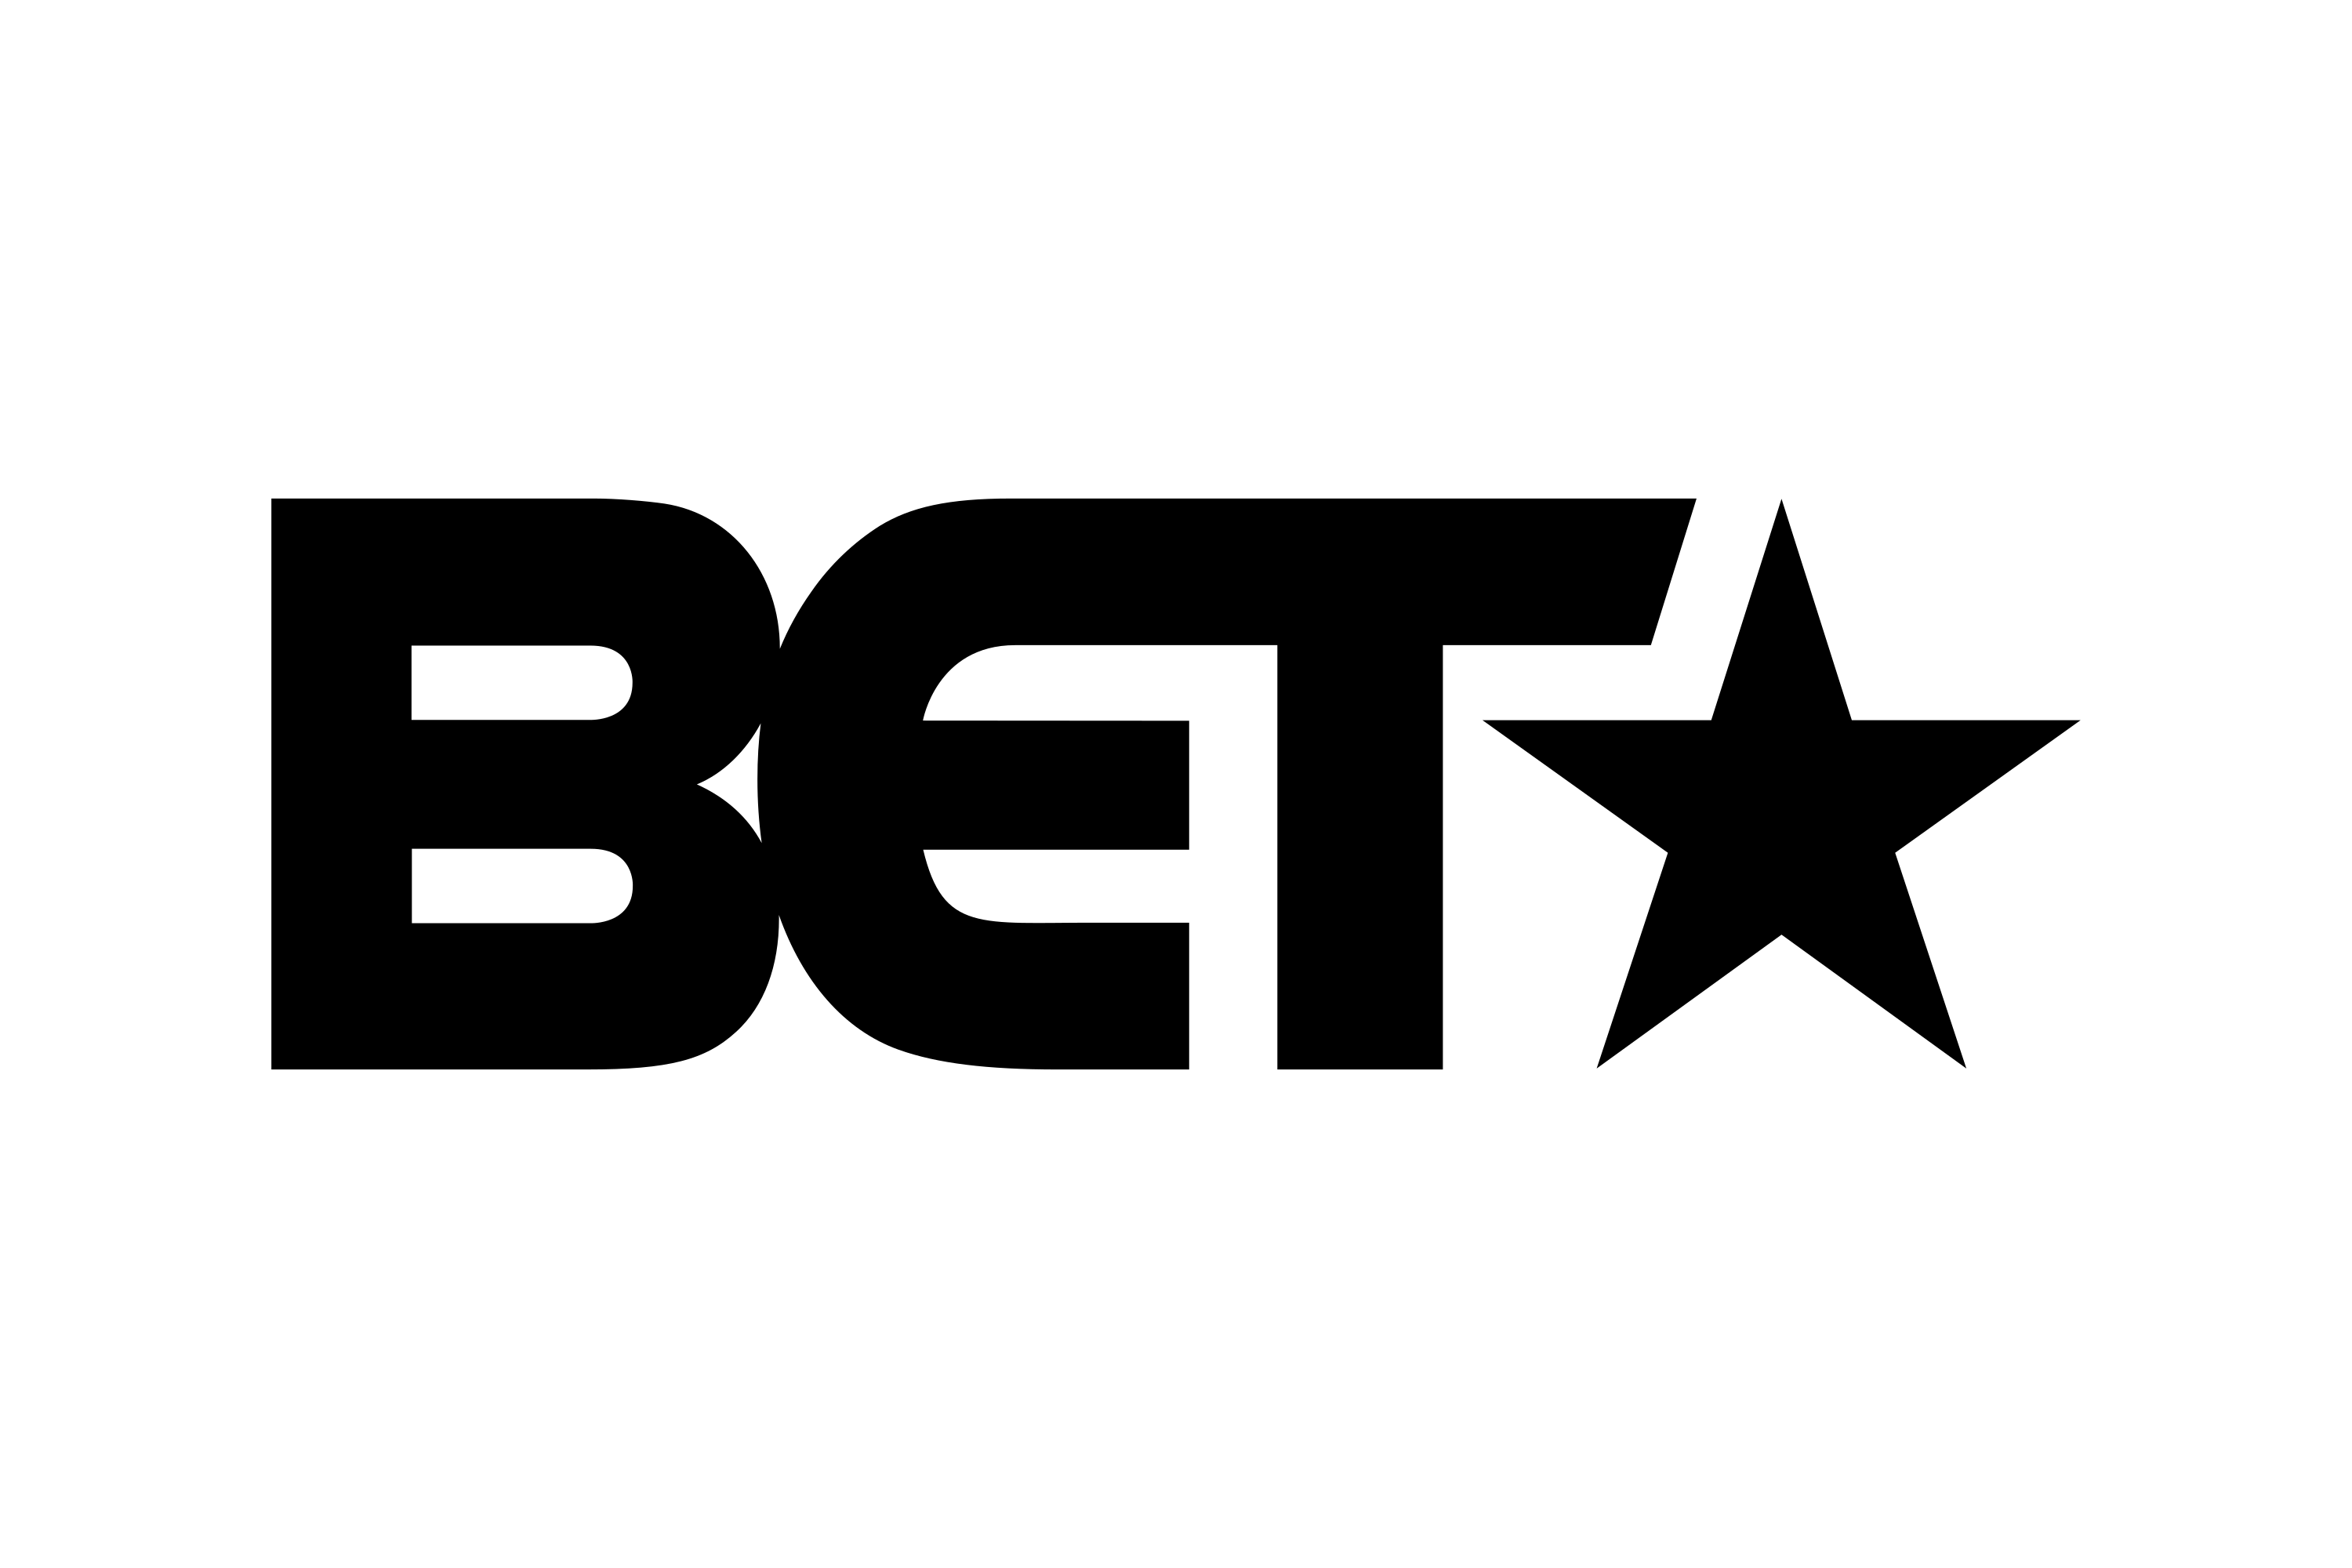 Download Black Entertainment Television (BET) Logo in SVG Vector or PNG